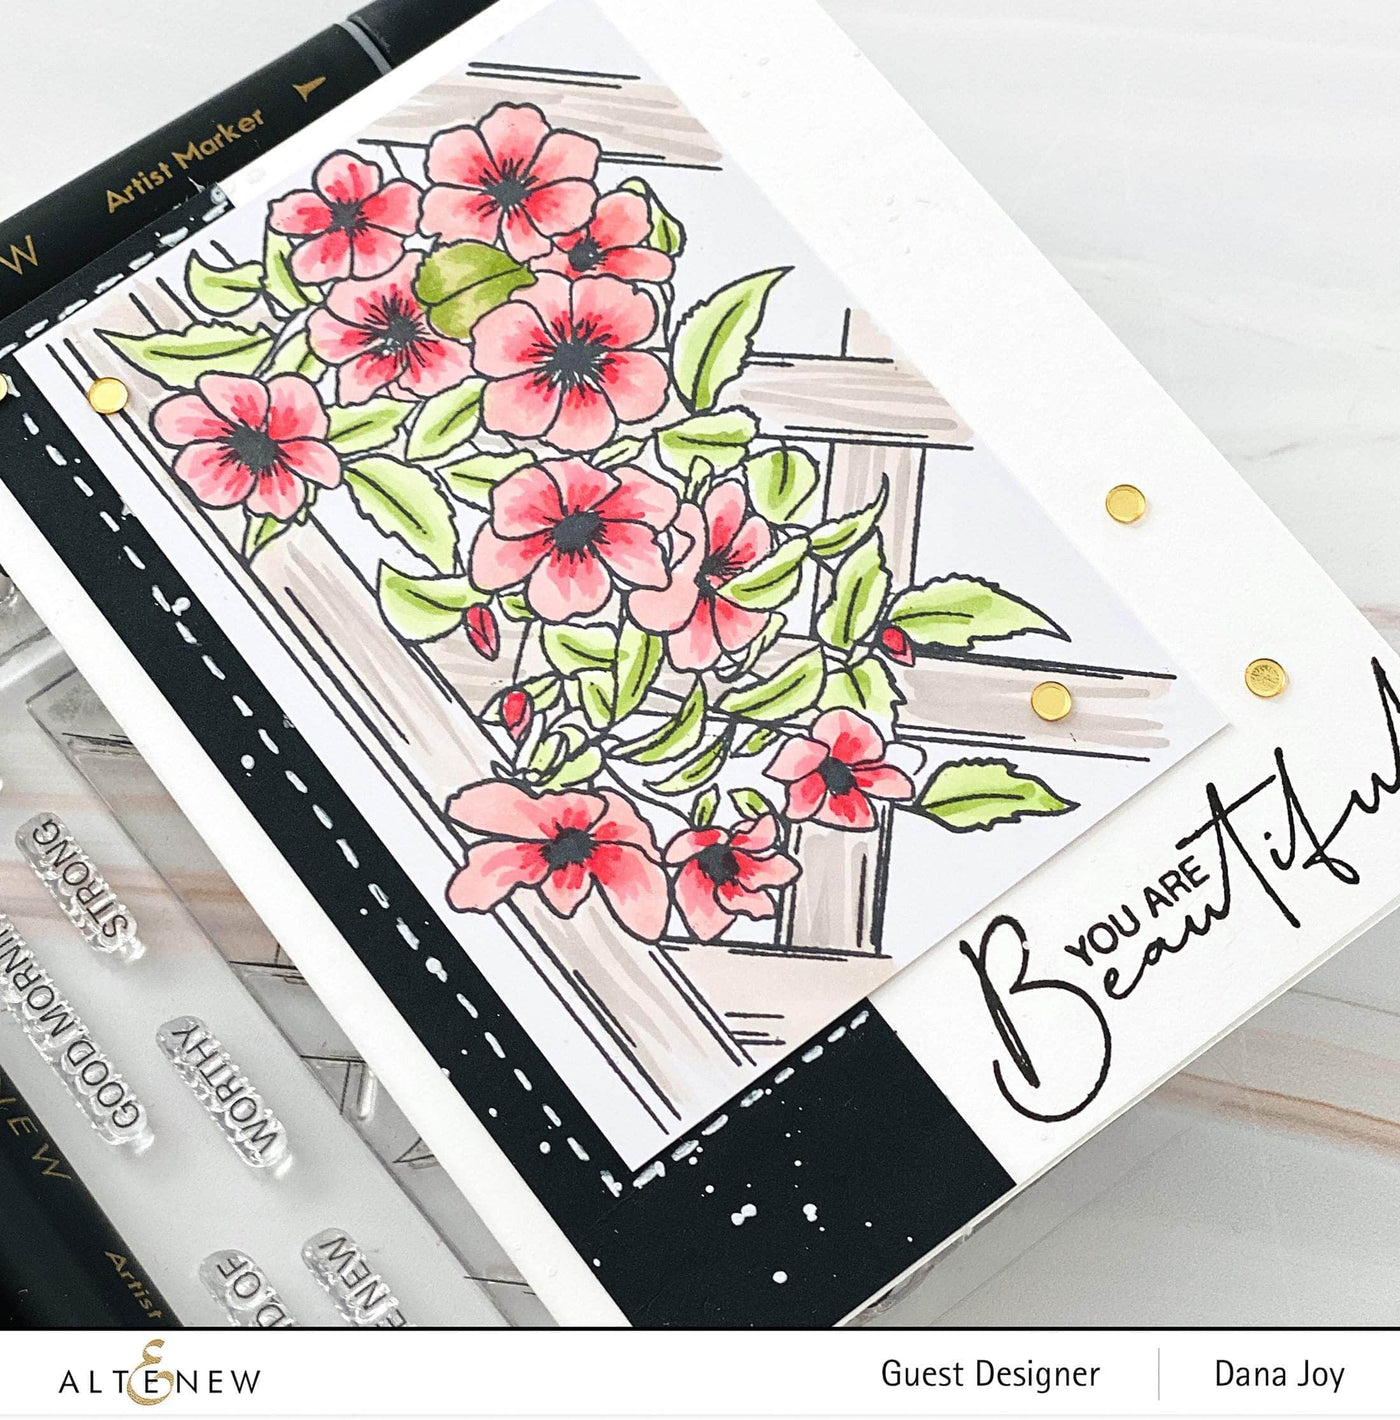 Clear Stamps Paint-A-Flower: Clematis Outline Stamp Set